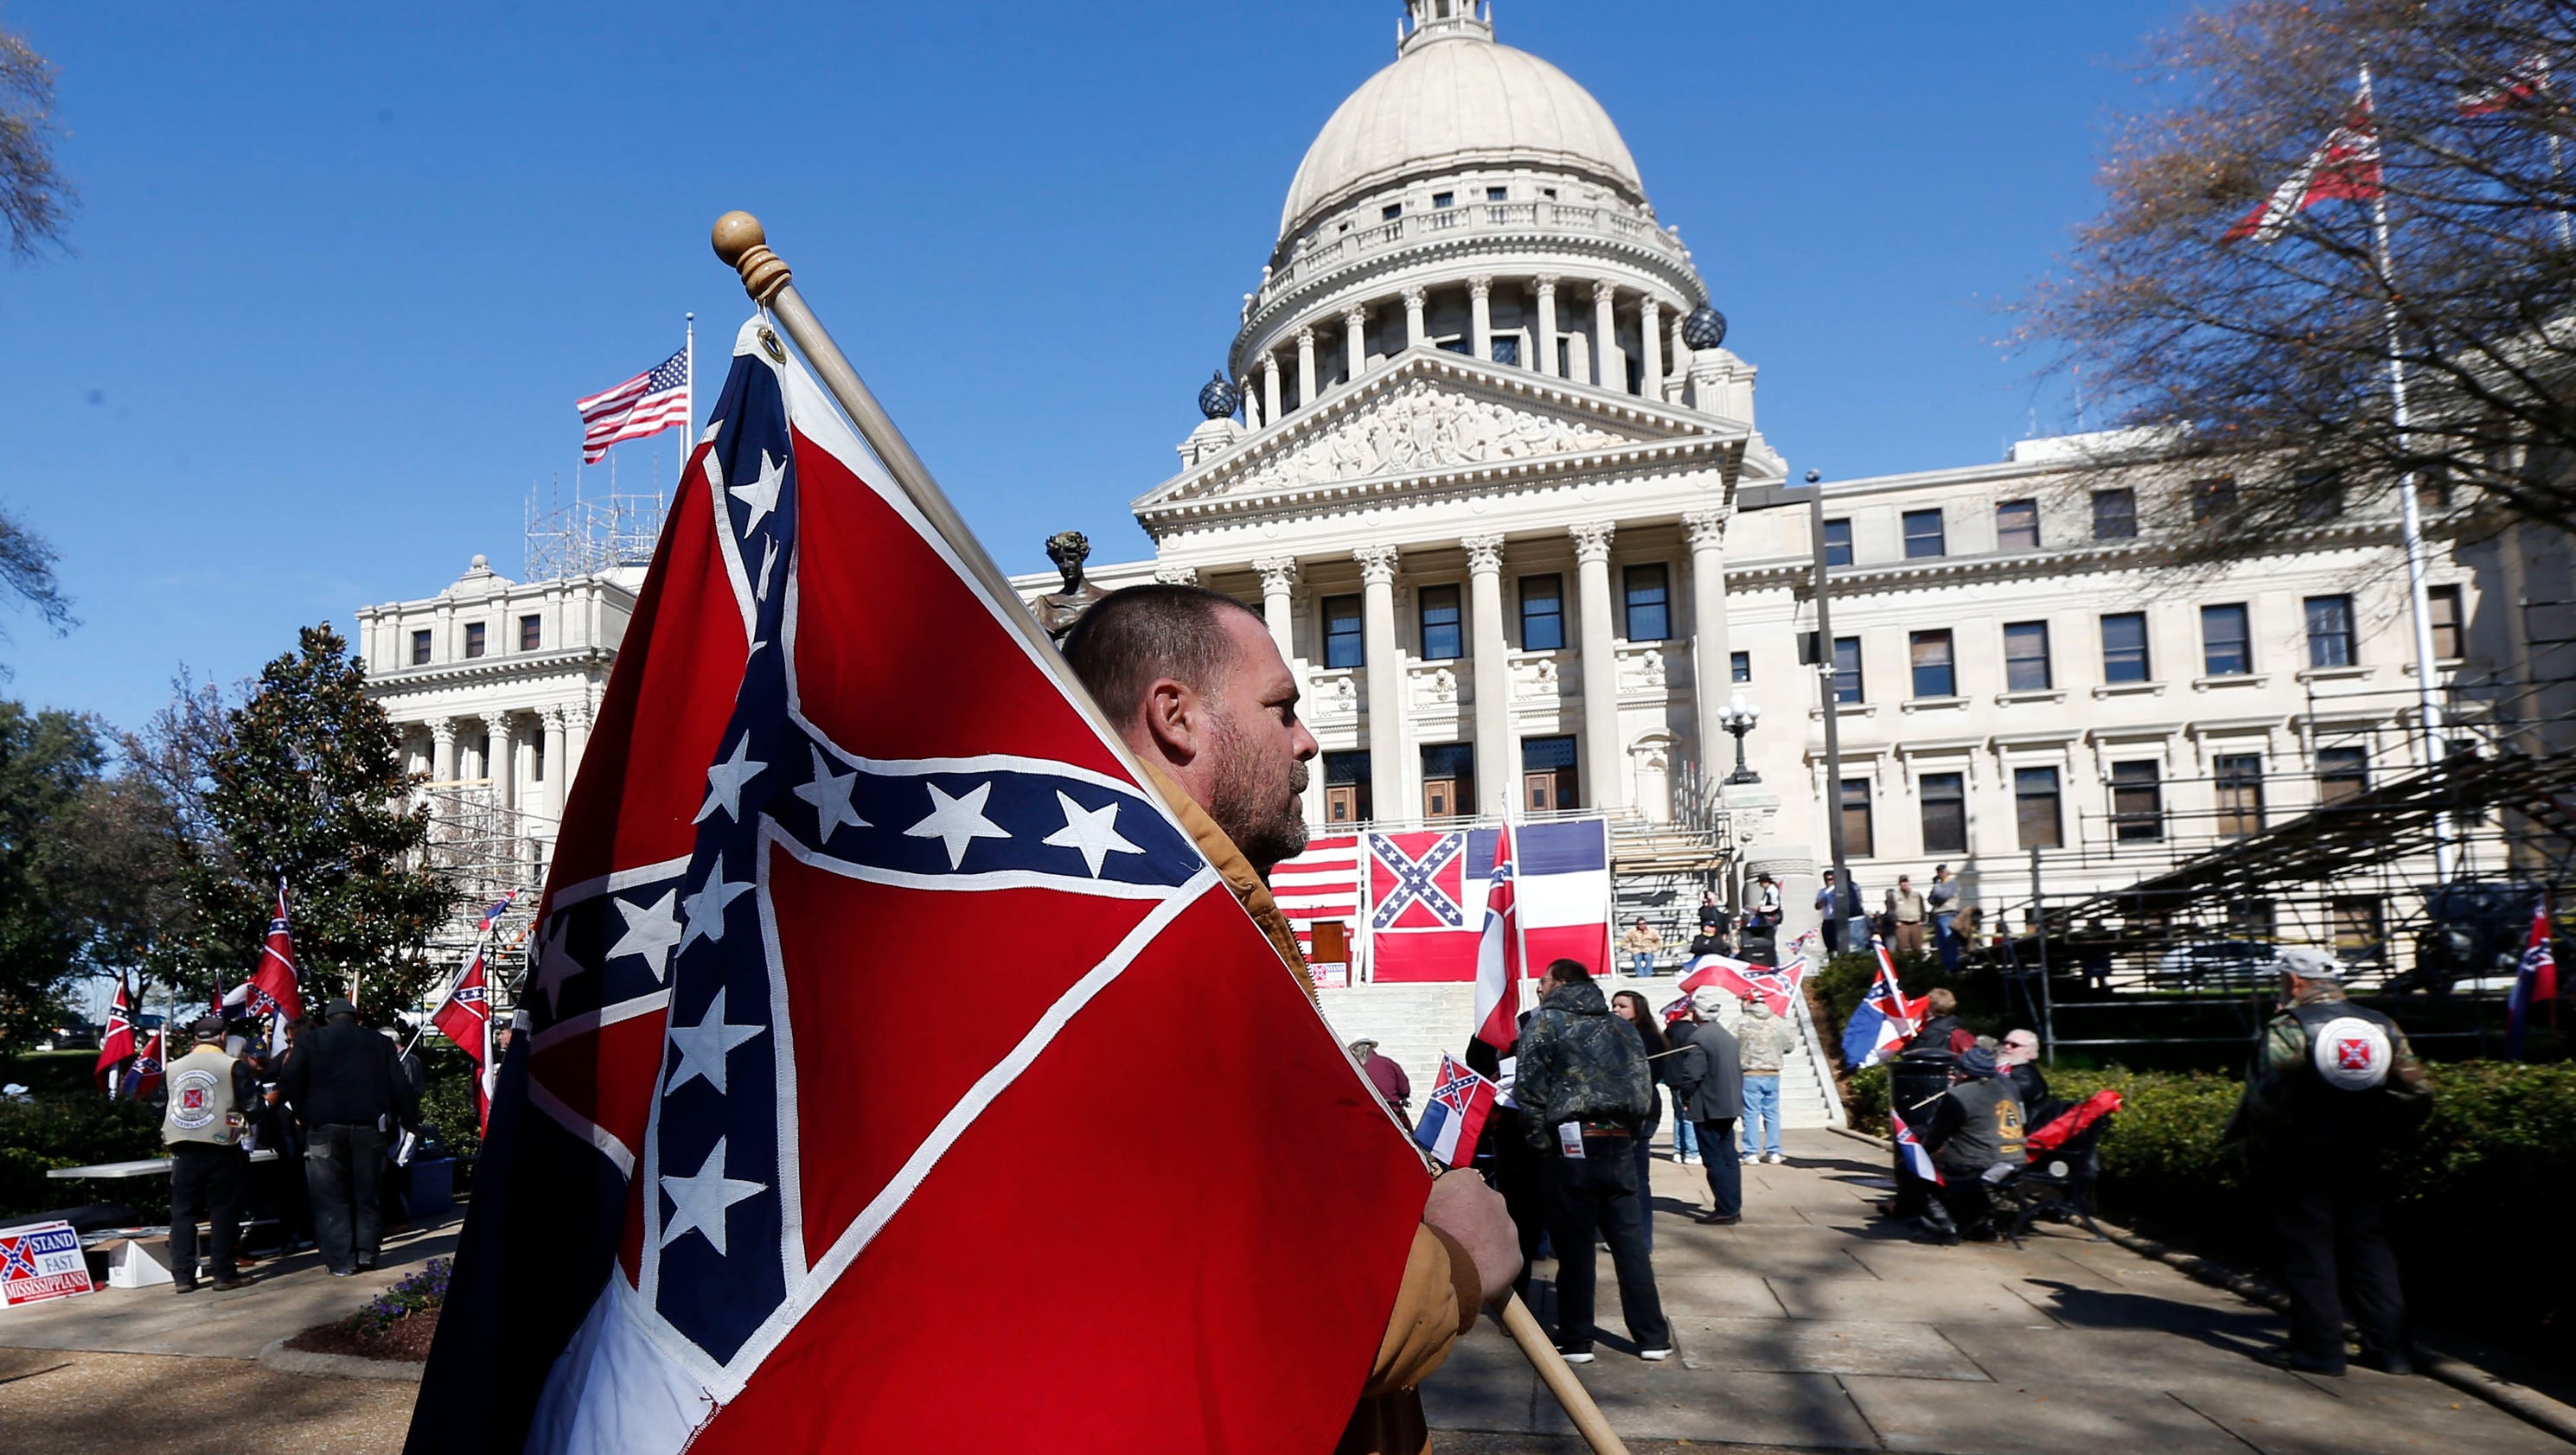 This despicable, racist image shows why Mississippi needs a new state flag